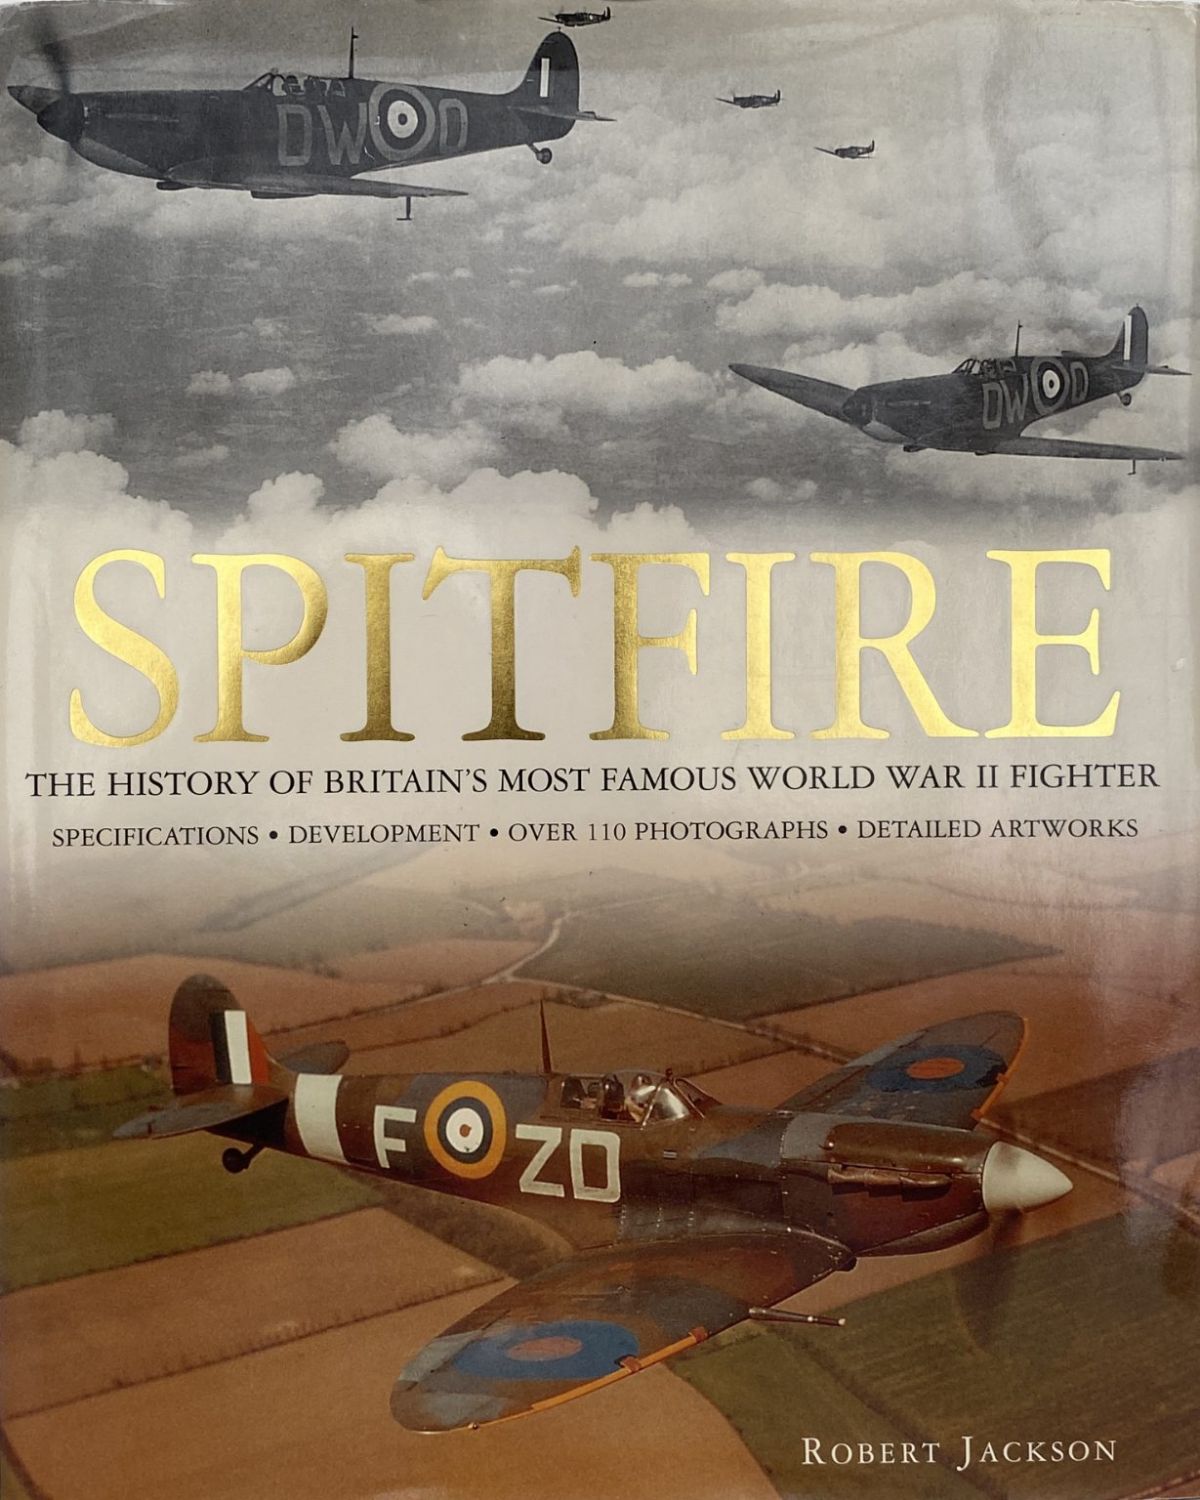 SPITFIRE: The history of Britain's most famous World War II Fighter